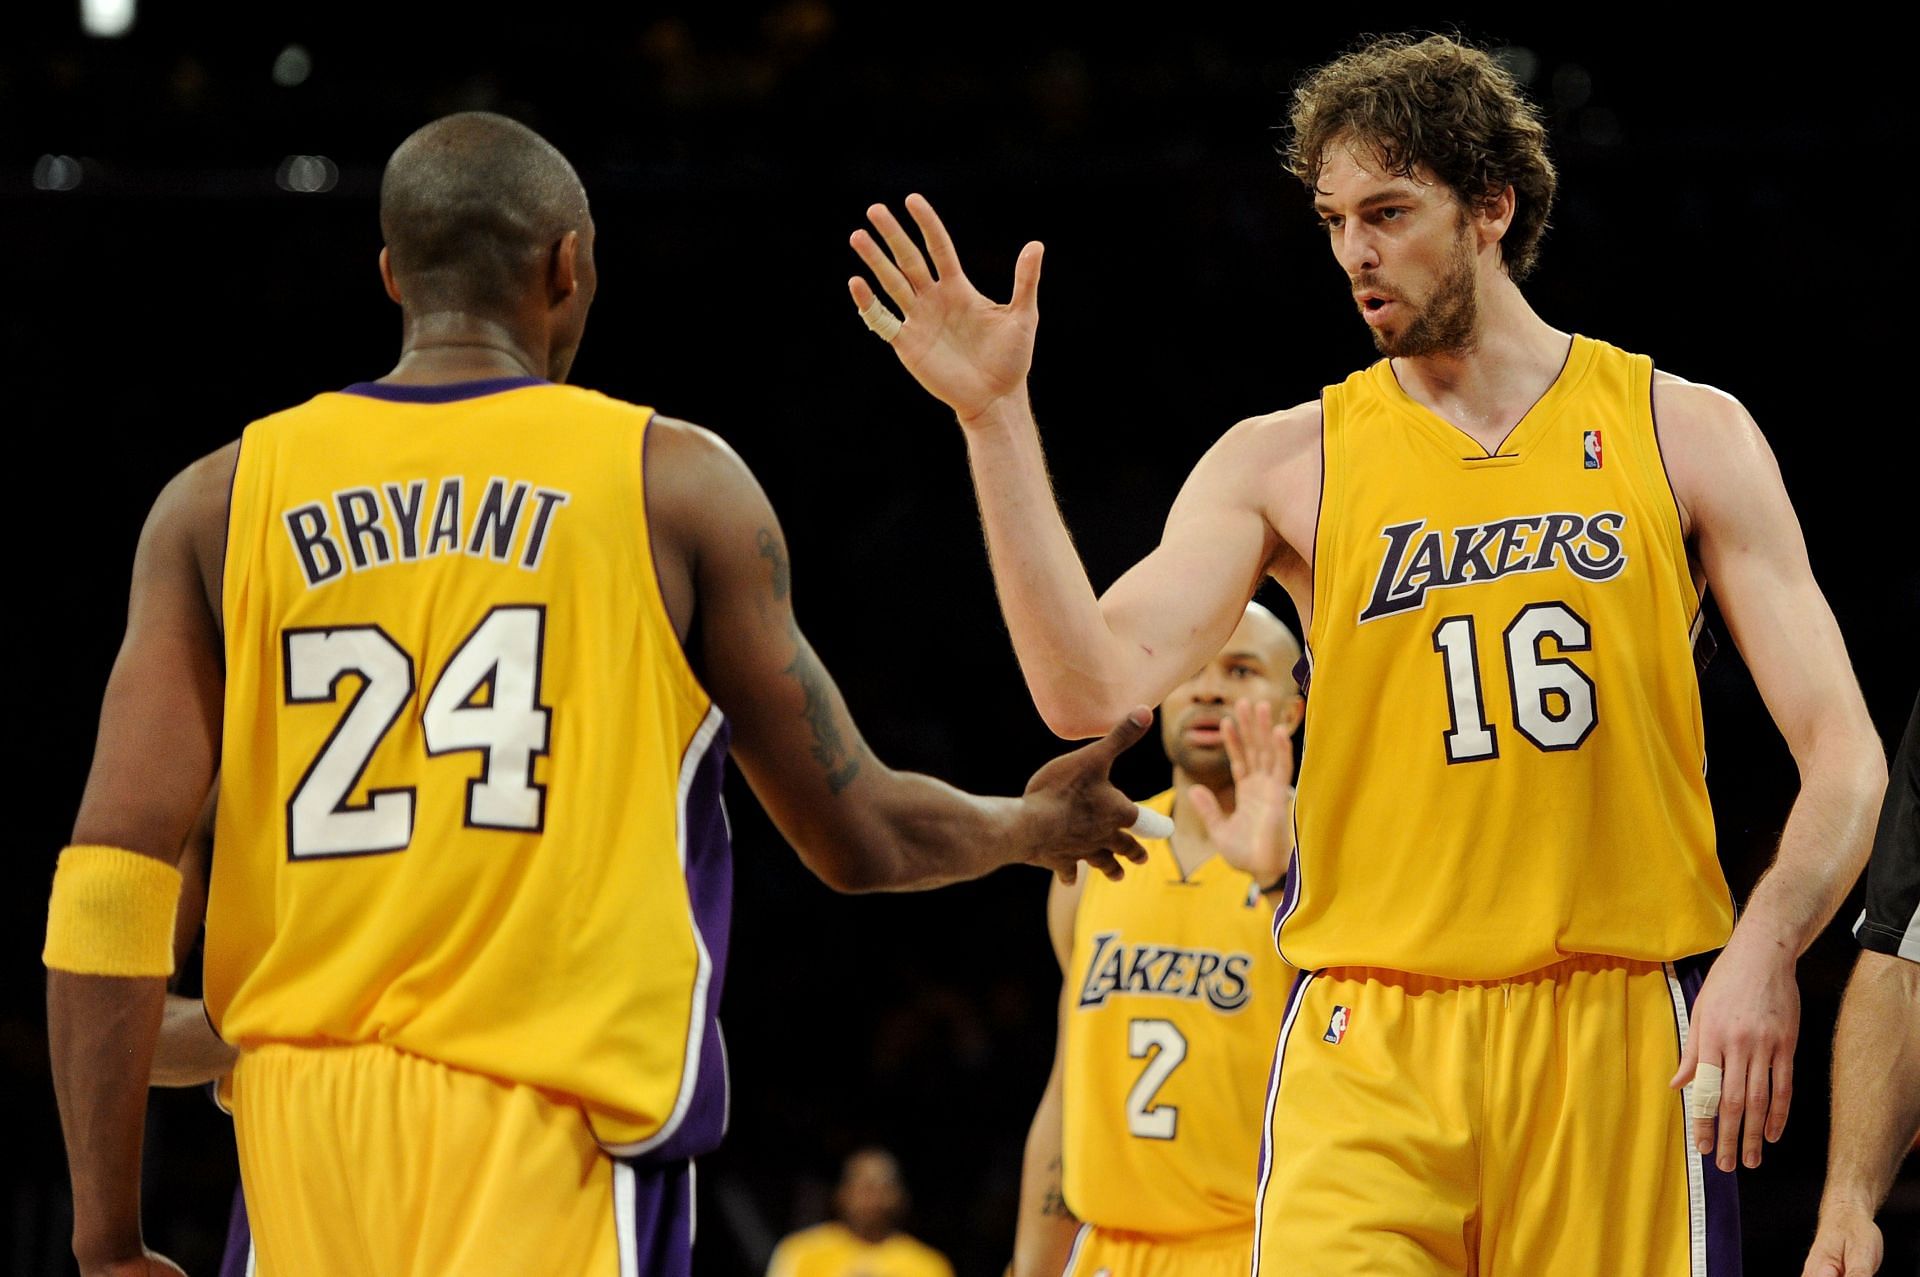 Pau Gasol was a big reason why Kobe Bryant added two more NBA titles to his resume.